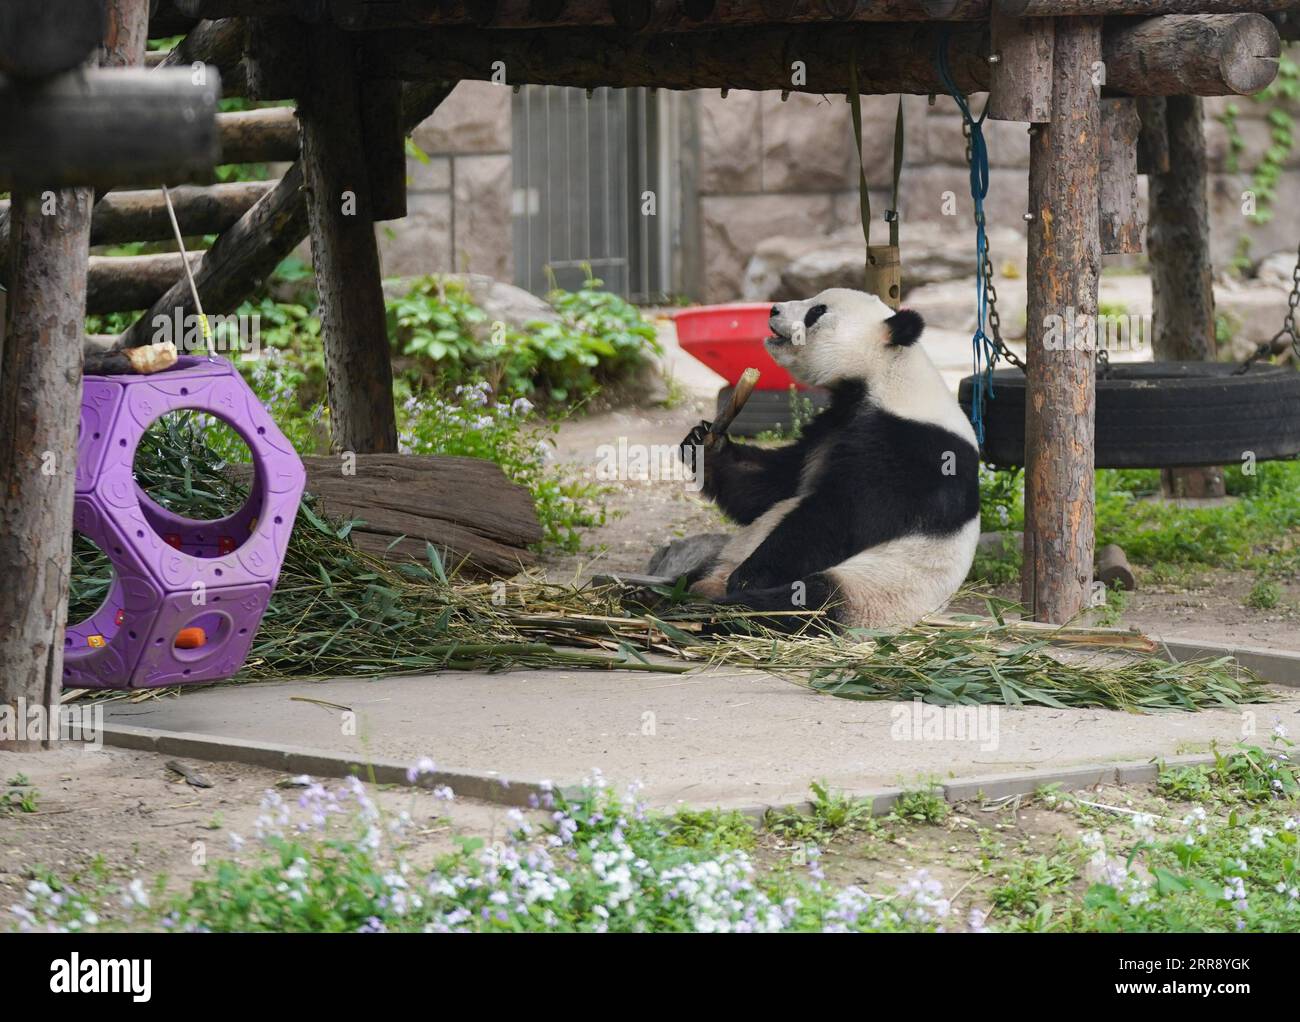 210521 -- BEIJING, May 21, 2021 -- Giant panda Meng Meng eats at the giant panda pavilion of Beijing Zoo in Beijing, capital of China, April 21, 2021. Ma Tao, 51 years old, breeder of the giant panda pavilion of Beijing Zoo, has been a feeder of giant pandas for 32 years. Every day, before working, Ma observes the condition of giant pandas and adjusts food recipe for them. Over the past years, Ma has fed about 20 giant pandas, with whom he also developed deep emotions. Nowadays he can quickly judge the health condition of the animal with methods he explored and concluded. He also teaches young Stock Photo